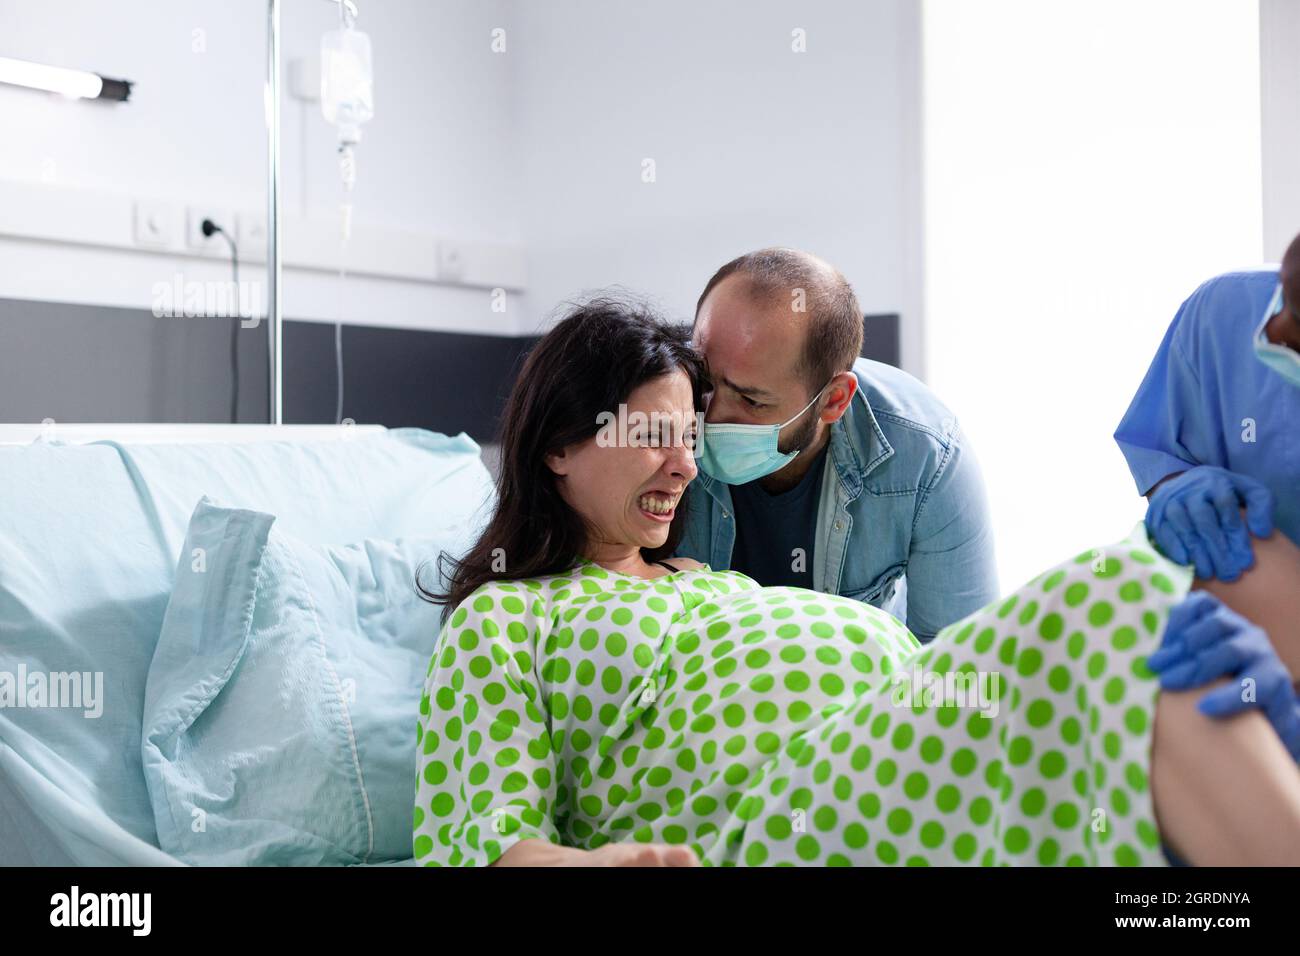 https://c8.alamy.com/comp/2GRDNYA/pregnant-woman-pushing-for-childbirth-having-contractions-in-hospital-ward-bed-young-adult-giving-birth-to-baby-with-man-obstetrician-and-african-american-nurse-at-medical-clinic-2GRDNYA.jpg